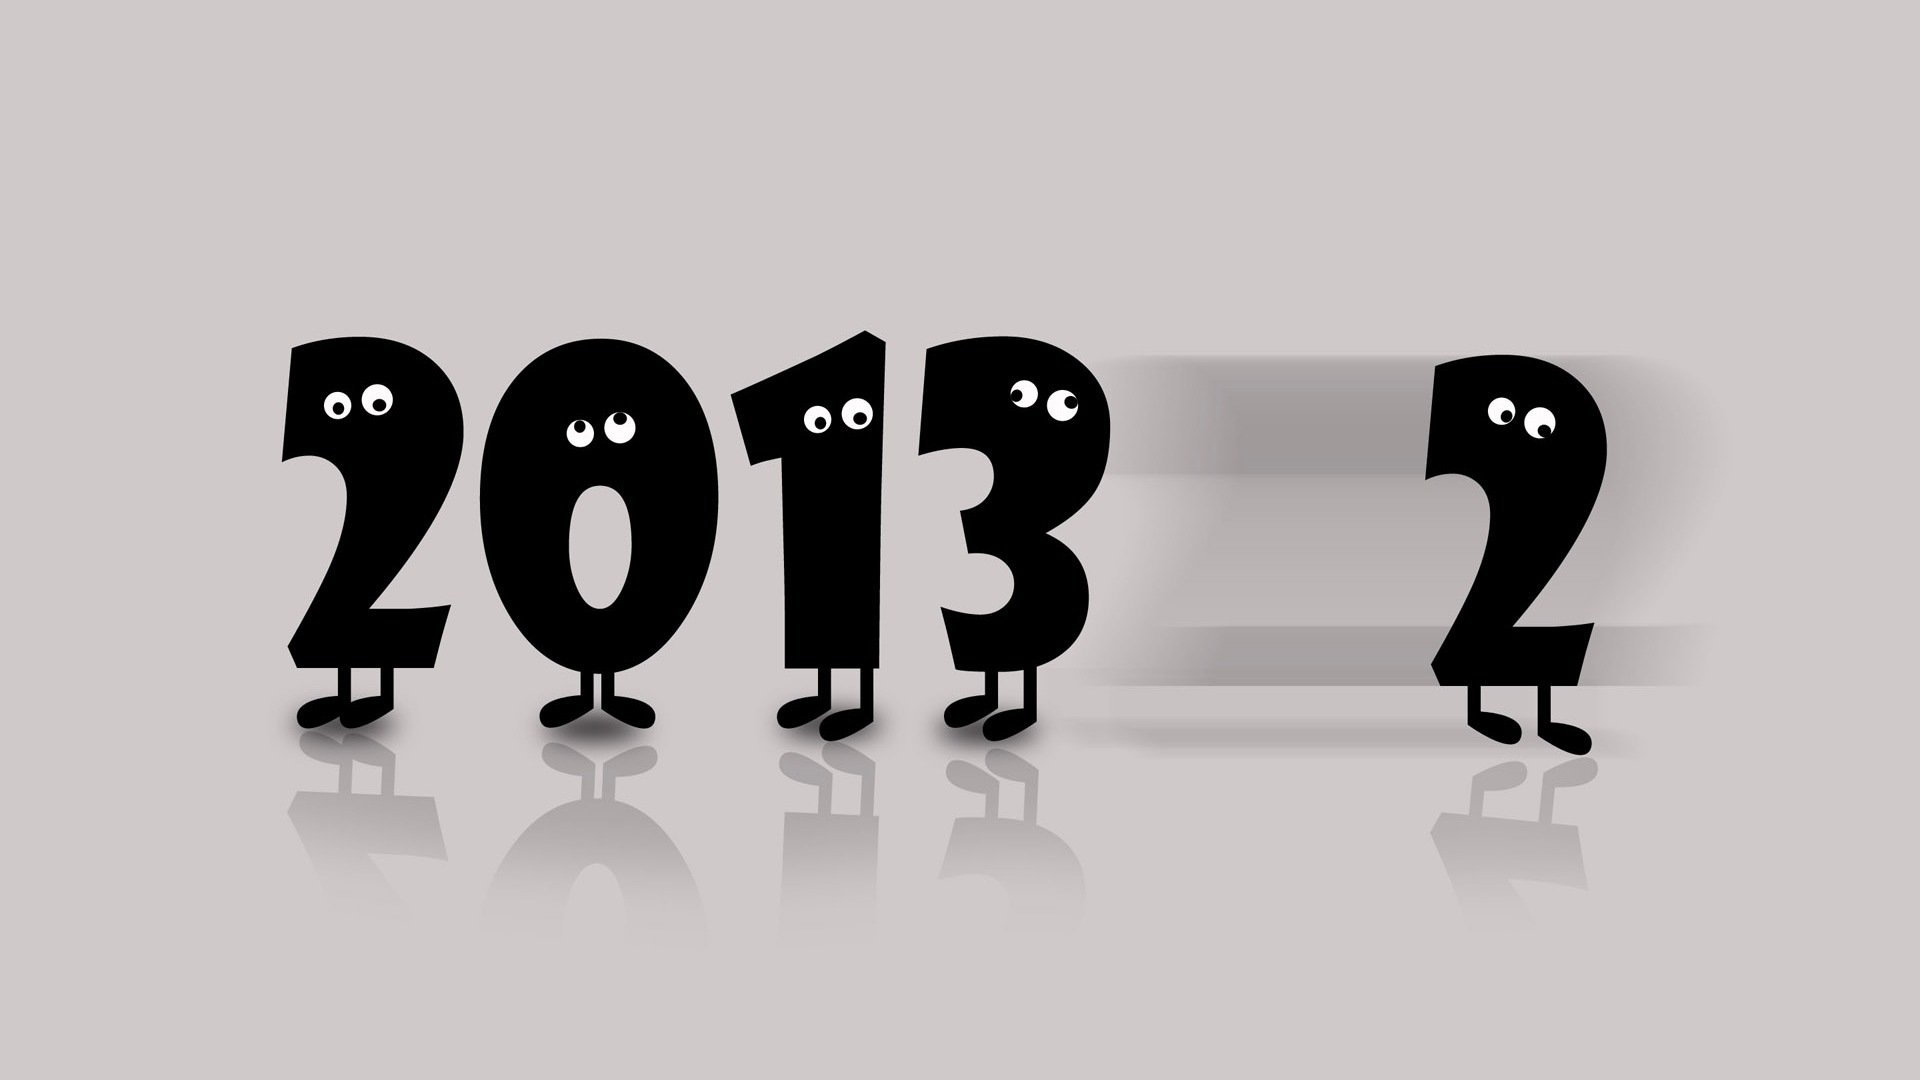 2013 Silvester Thema kreative Tapete (1) #2 - 1920x1080